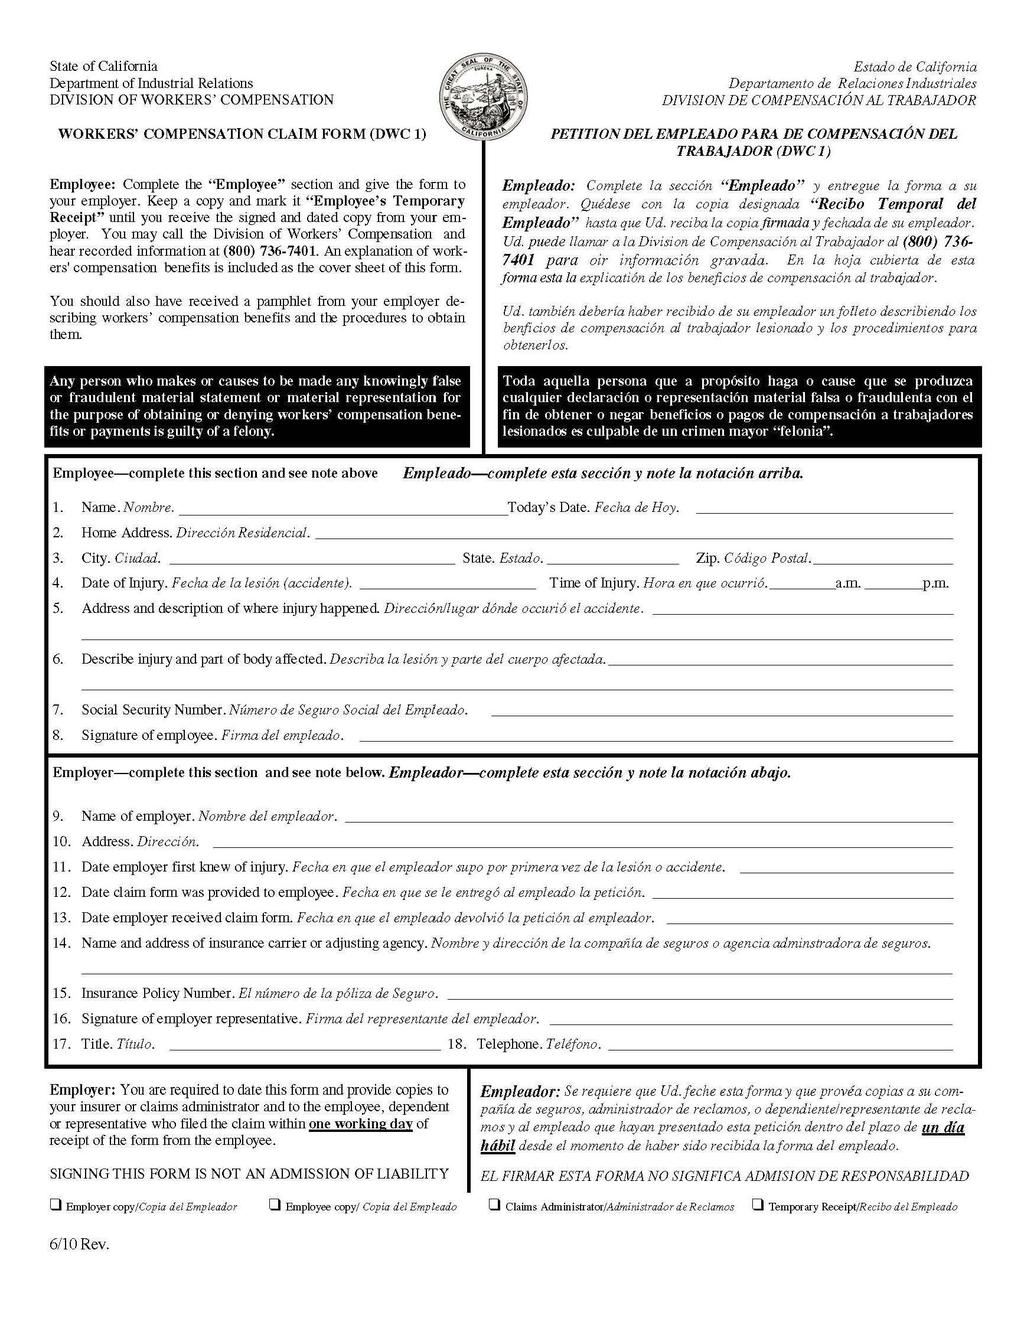 Rolling Claim Form B: California Employer s Report